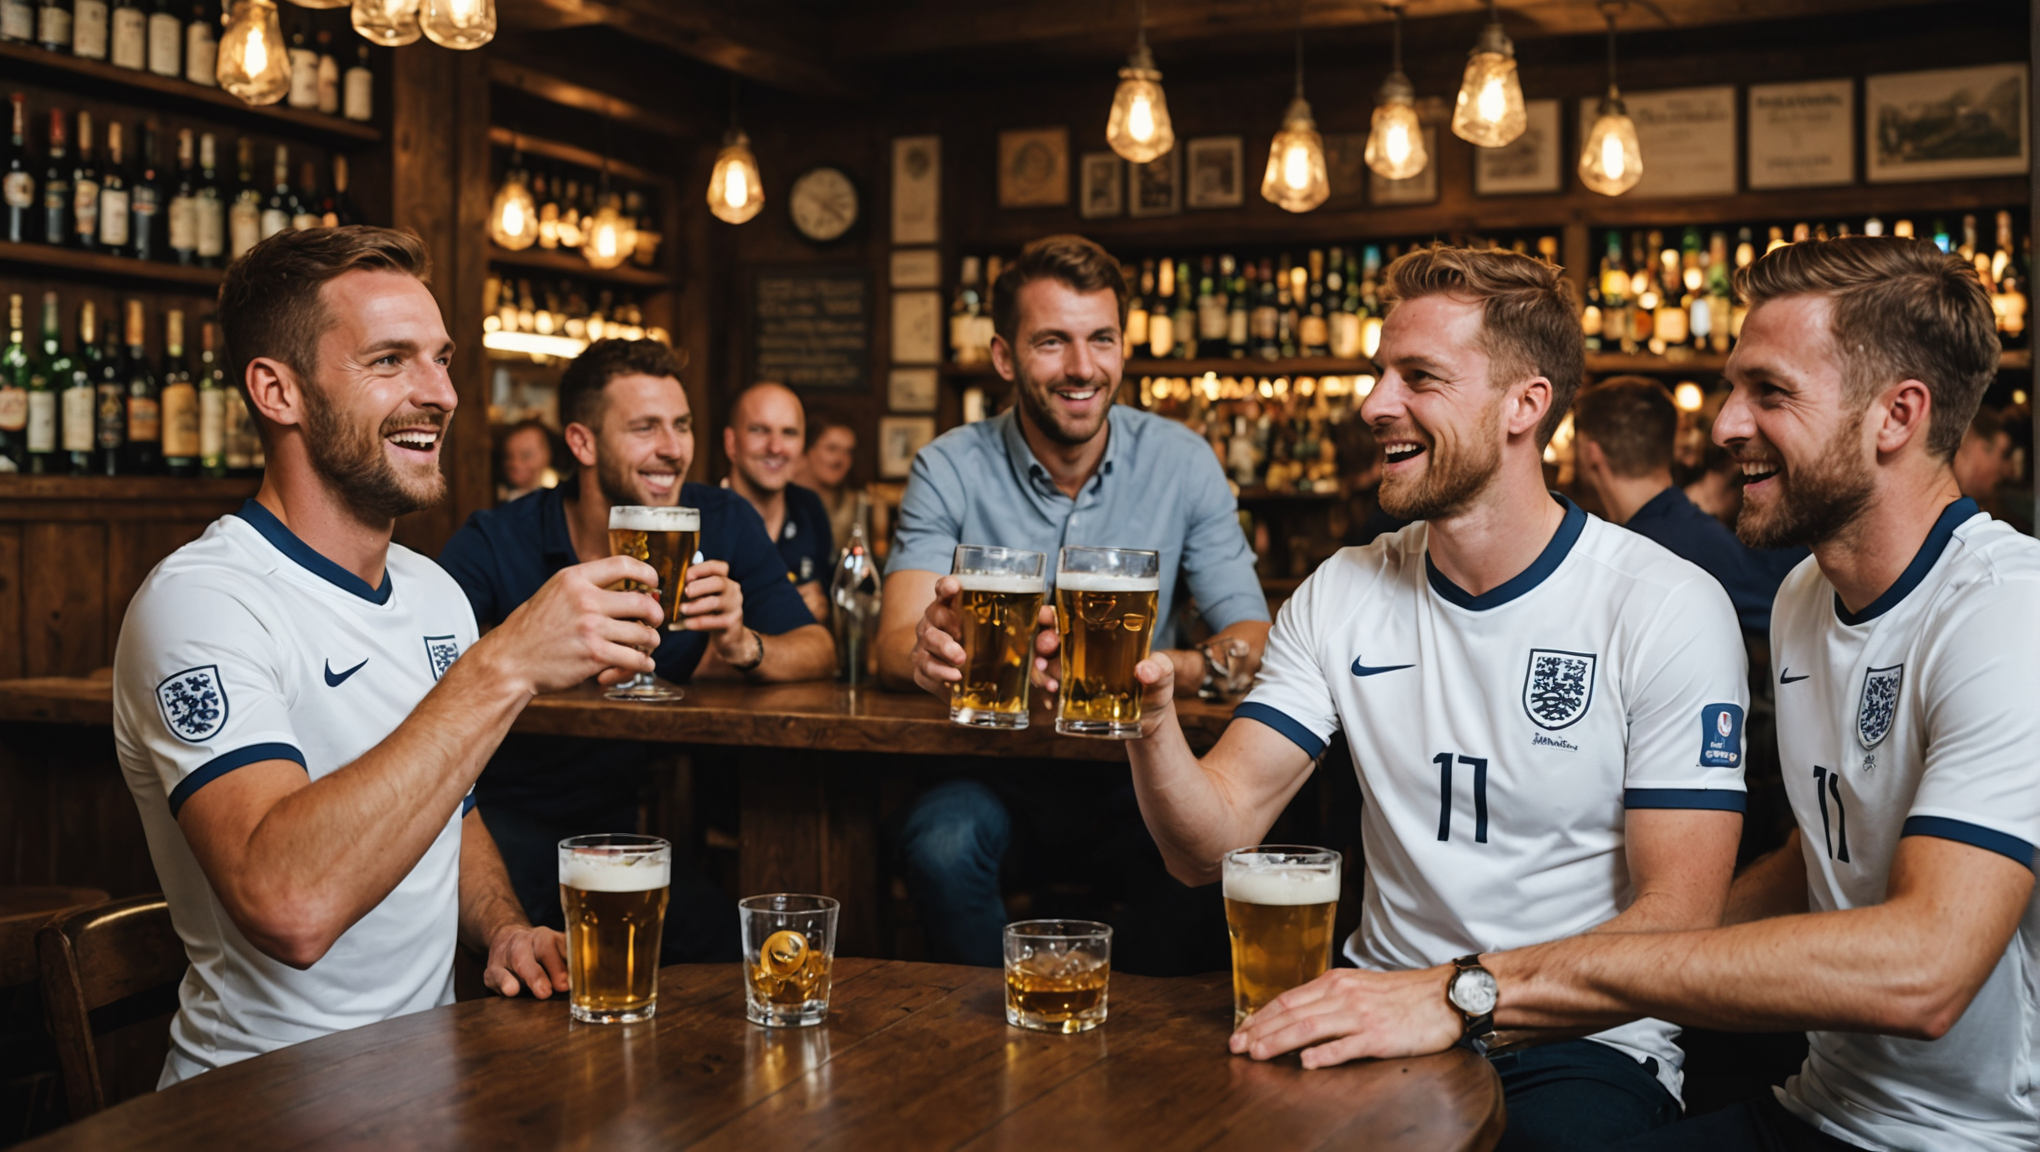 ensure the safety of england fans at your favorite pub during euro 2024 quarter-finals with our comprehensive measures and protocols. join us for a secure and enjoyable experience!